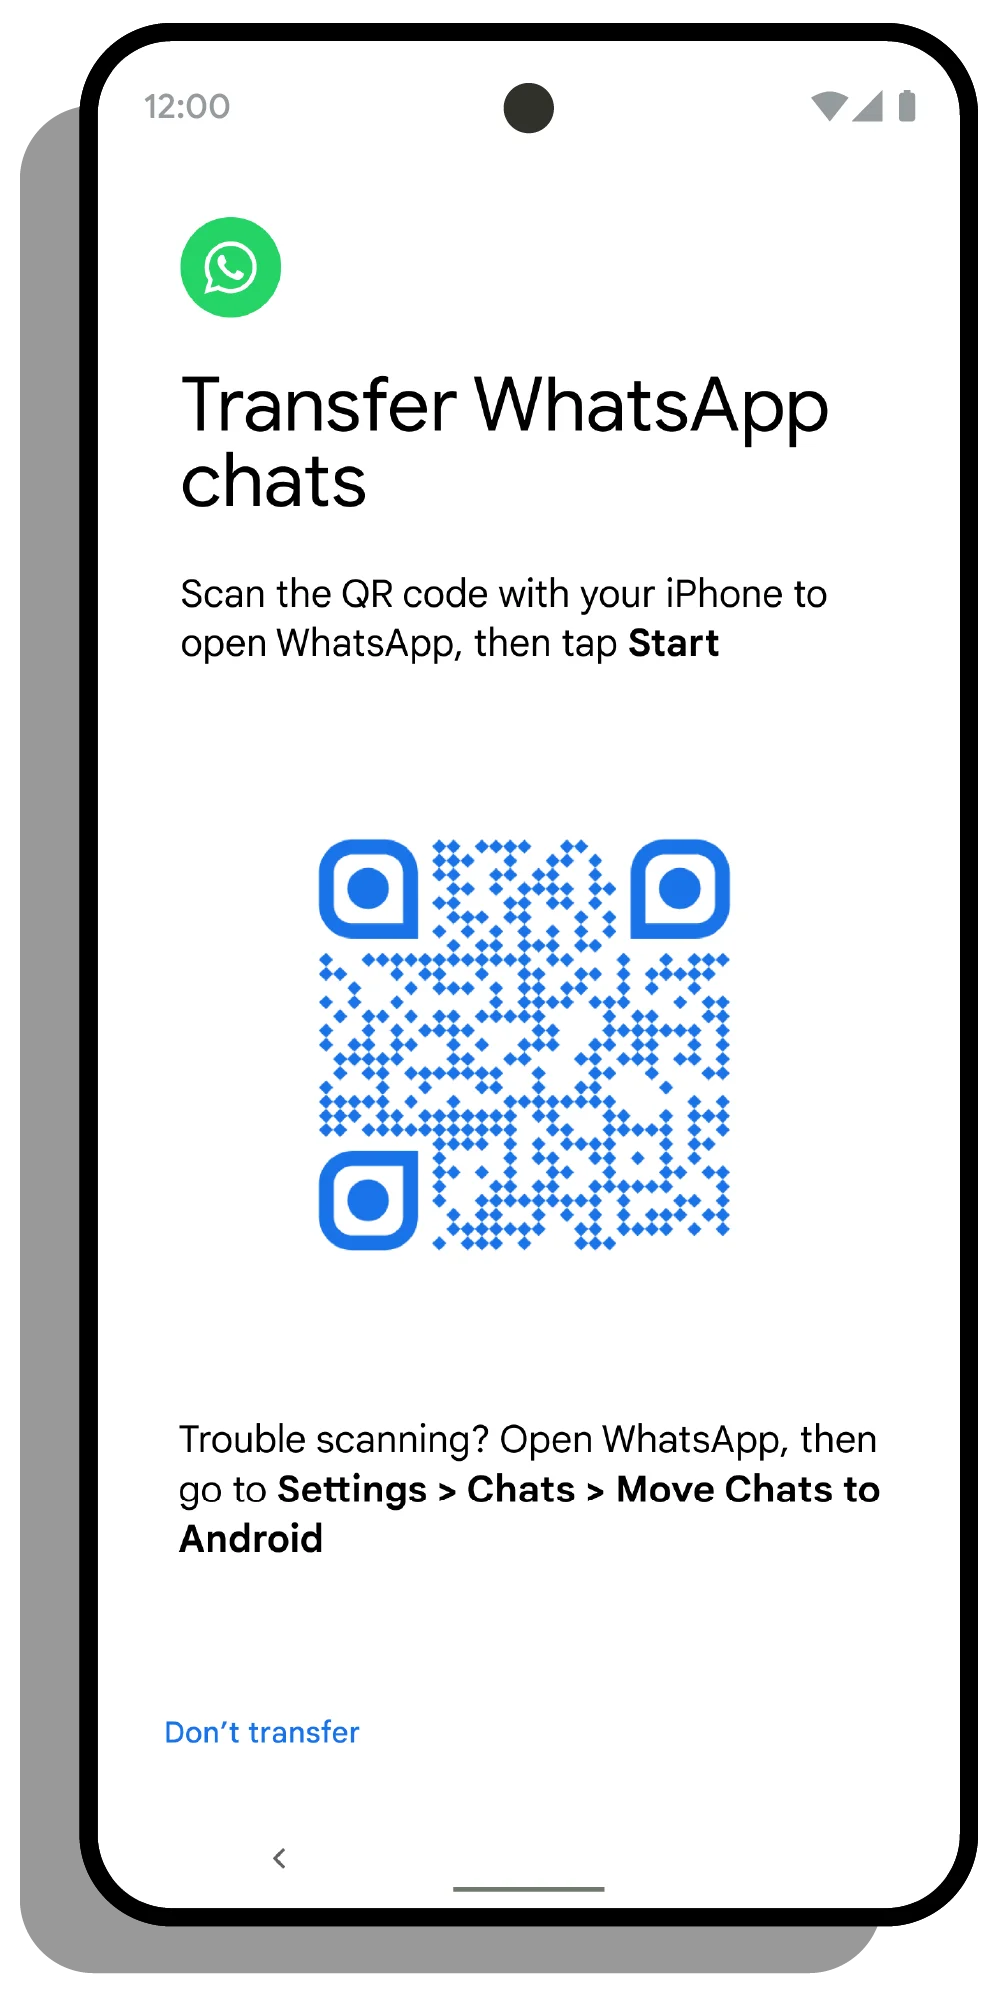 Transfer WhatsApp Chats by Scanning QR Code